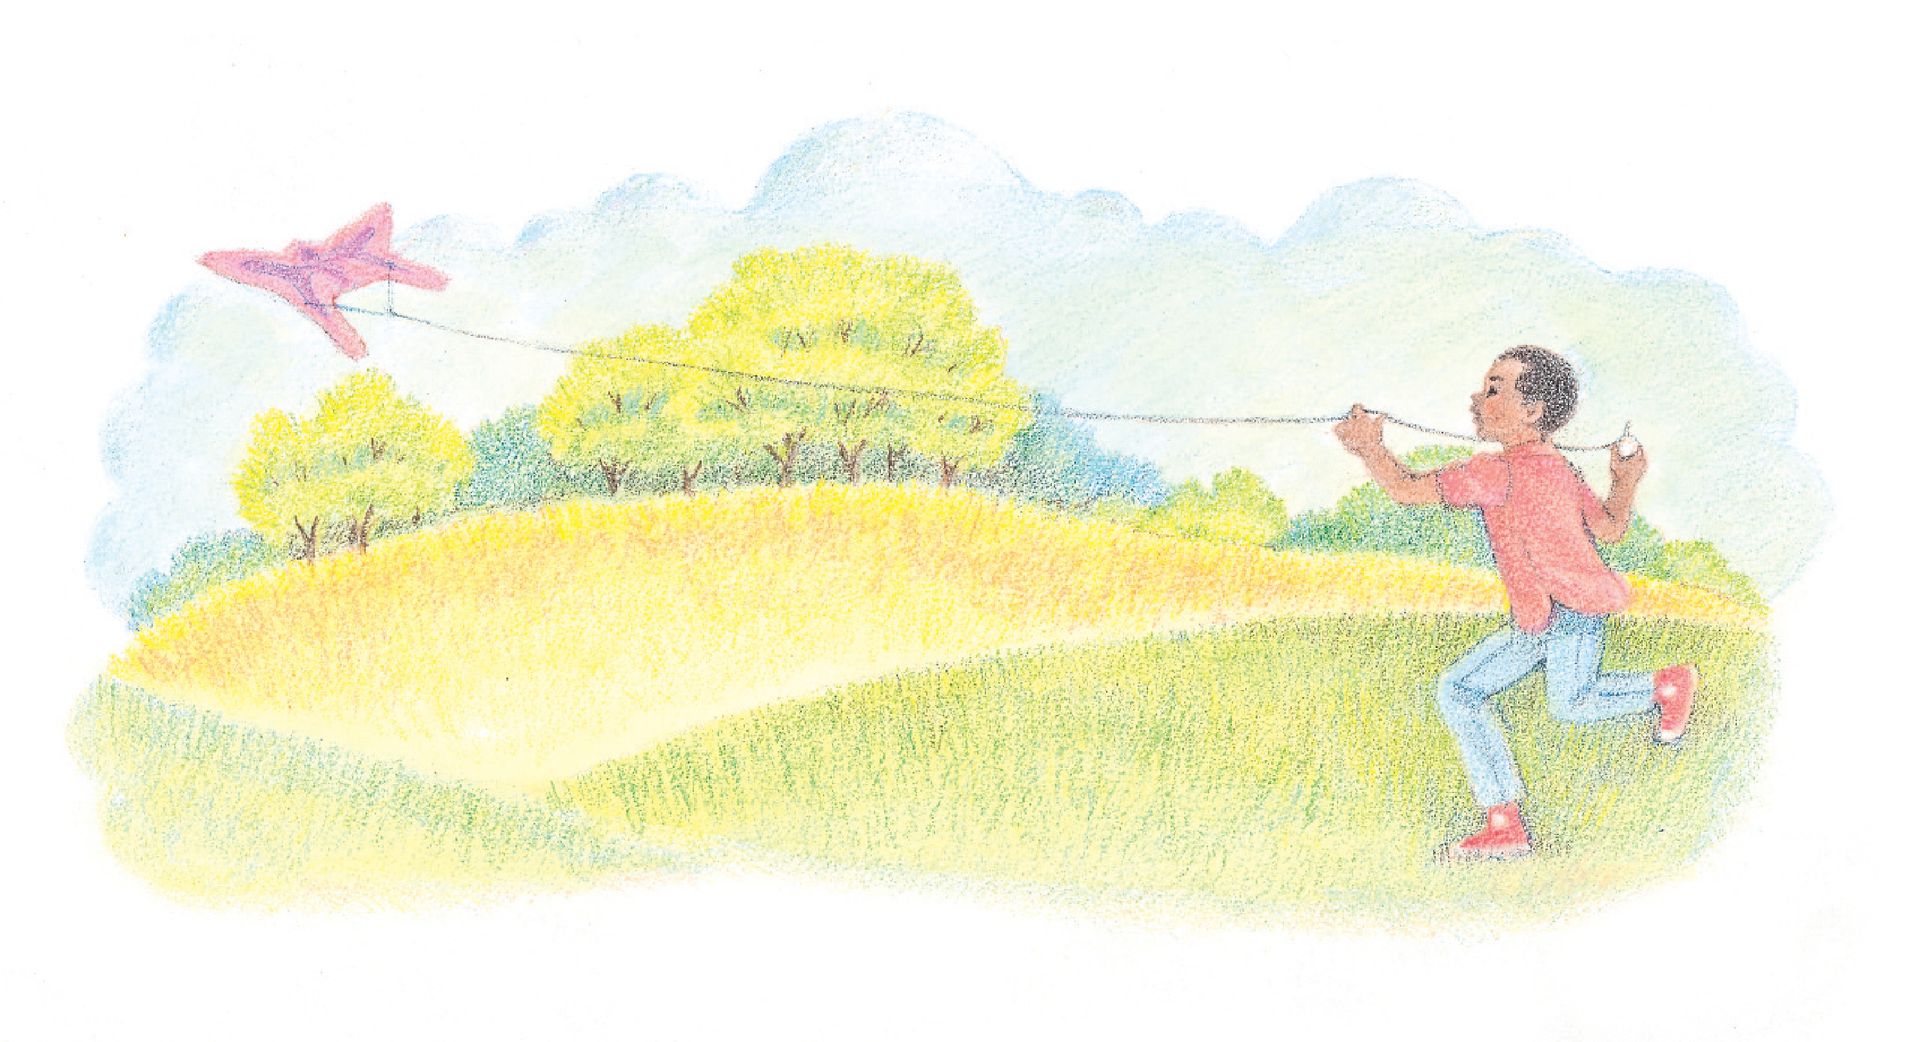 A boy running through a field and flying a kite. From the Children’s Songbook, page 230, “I Think the World Is Glorious”; watercolor illustration by Virginia Sargent.